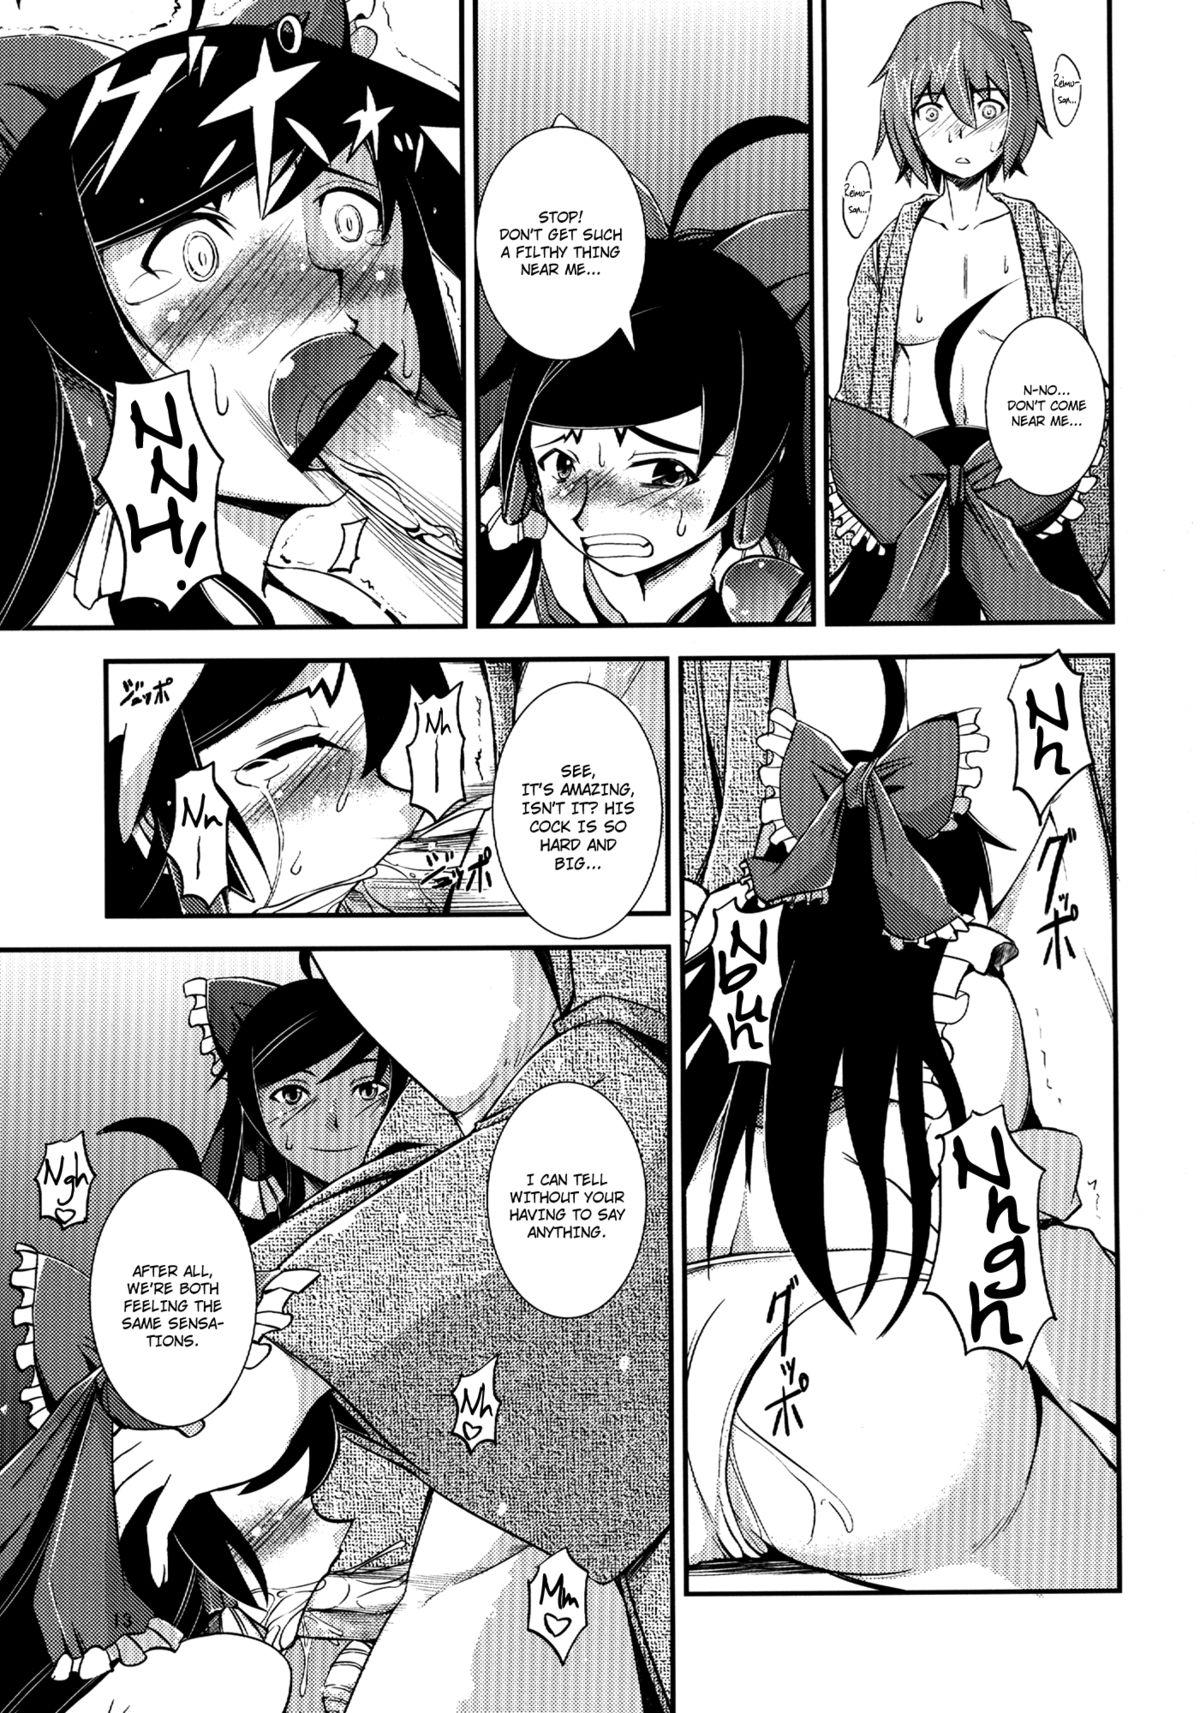 Best Blow Job The Incident of the Black Shrine Maiden - Touhou project Cuckolding - Page 13